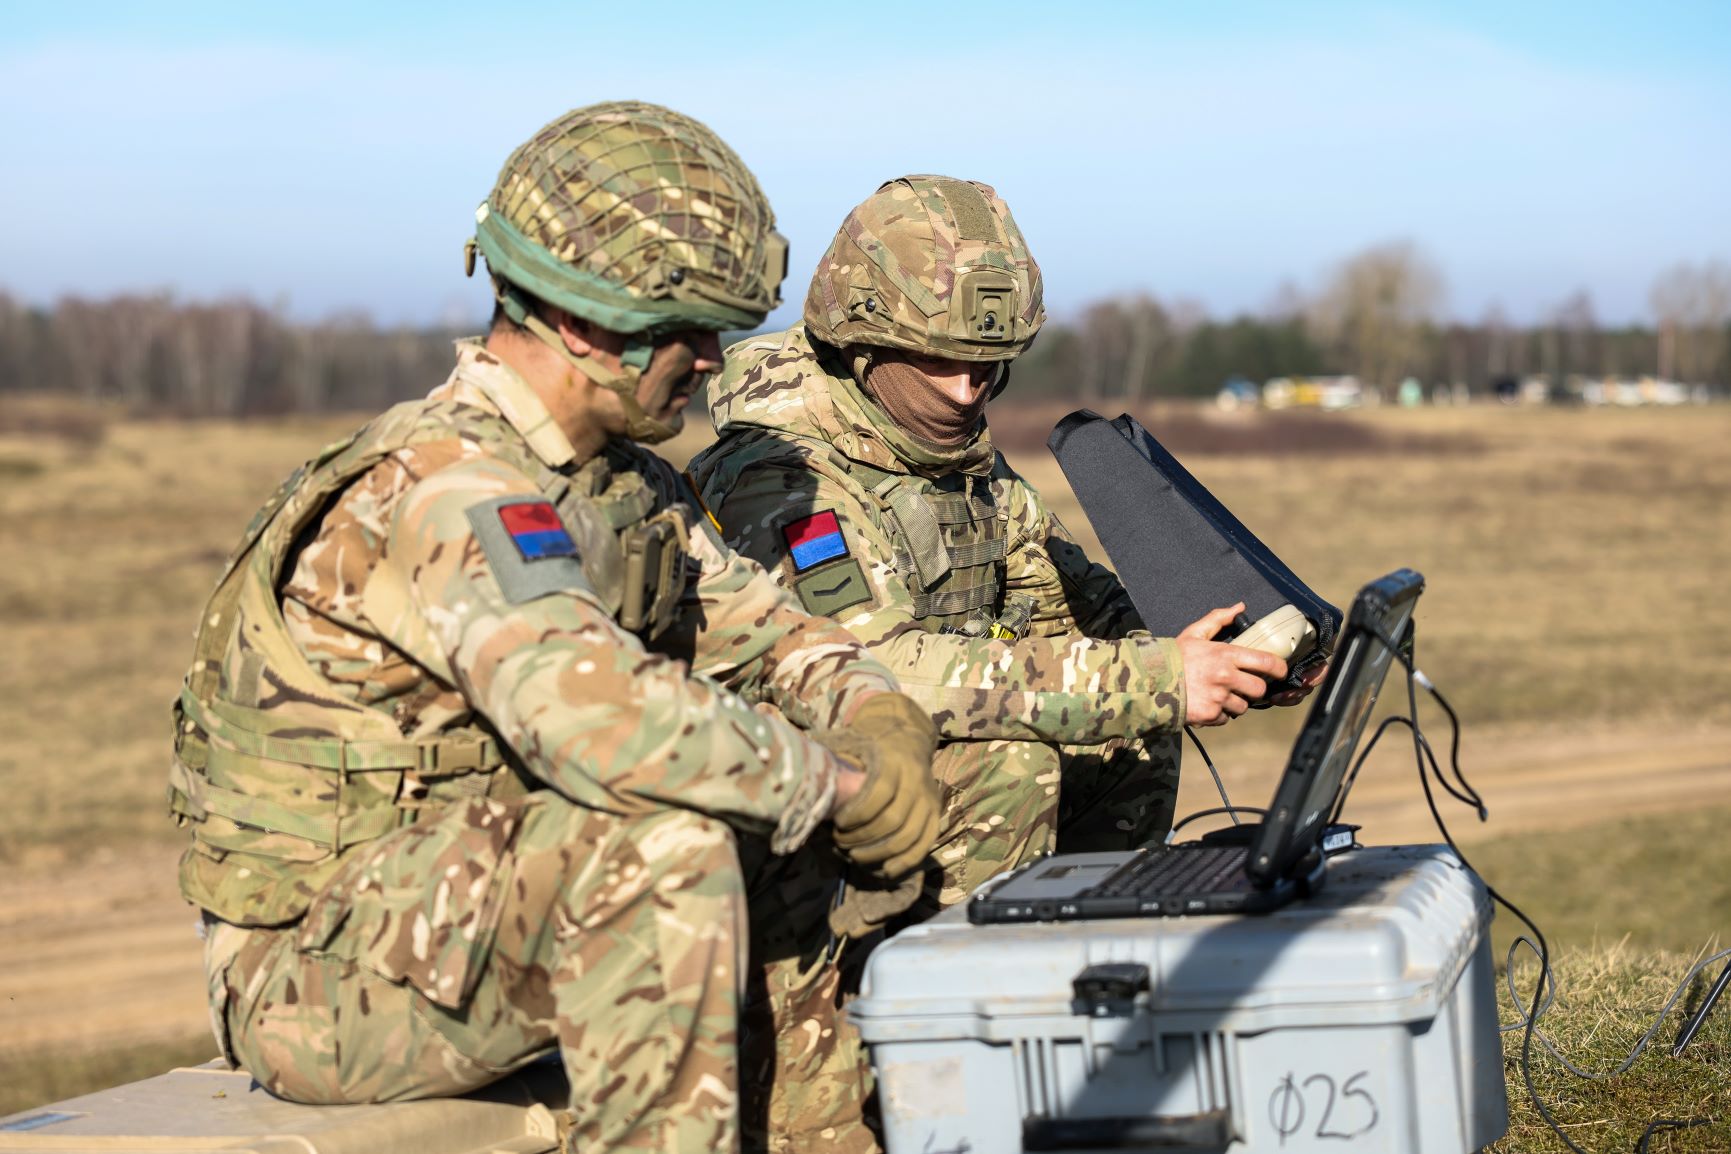 Royal Artillery remotely piloted air system pilots operate a first-person view drone during Ex Steadfast Defender, Poland.